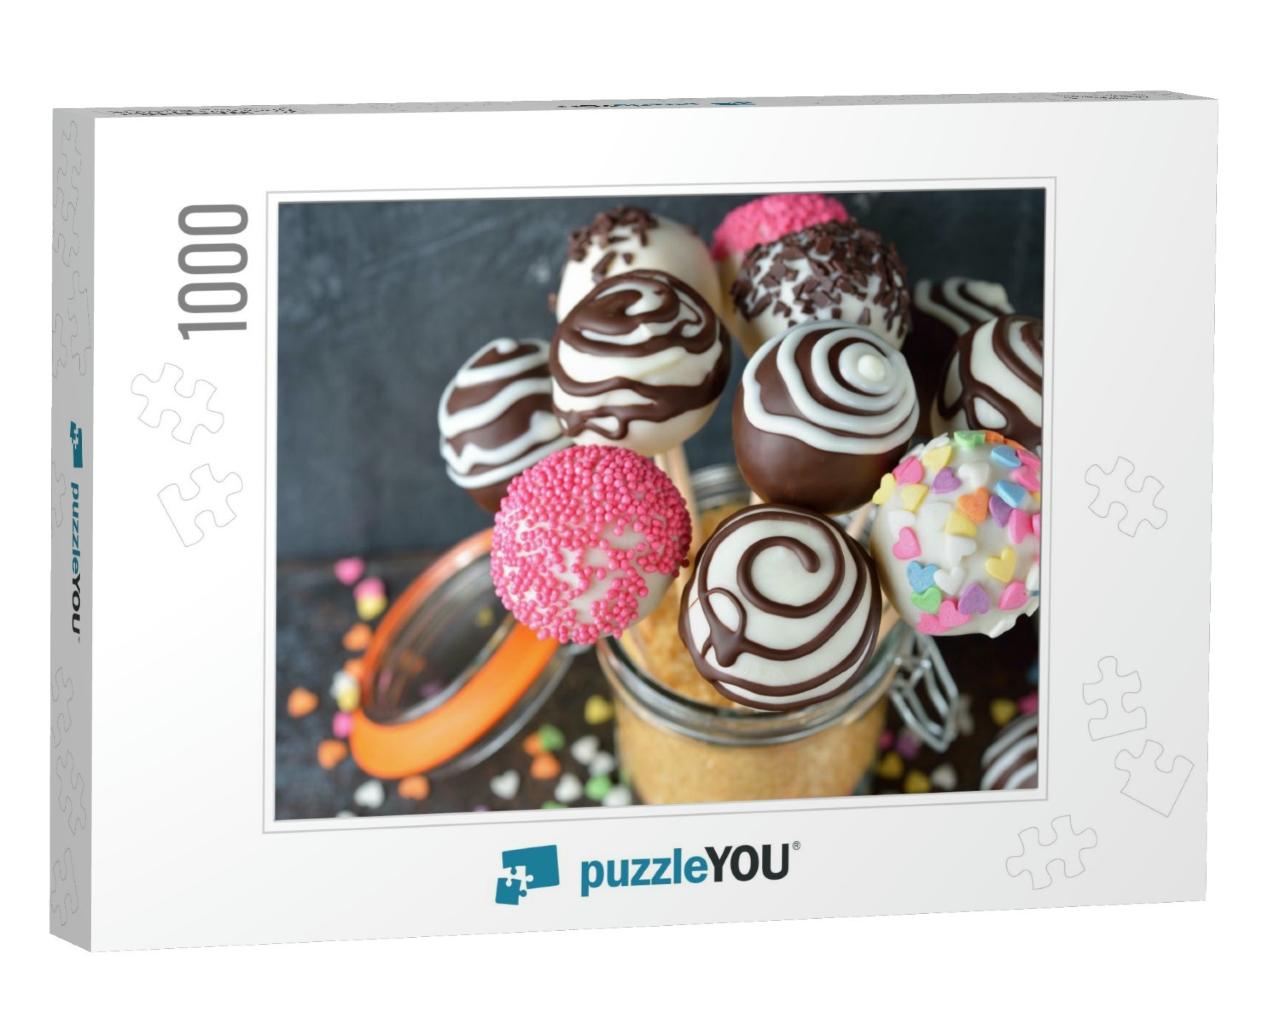 Various Cake Pops Decorated with White & Dark Chocolate o... Jigsaw Puzzle with 1000 pieces